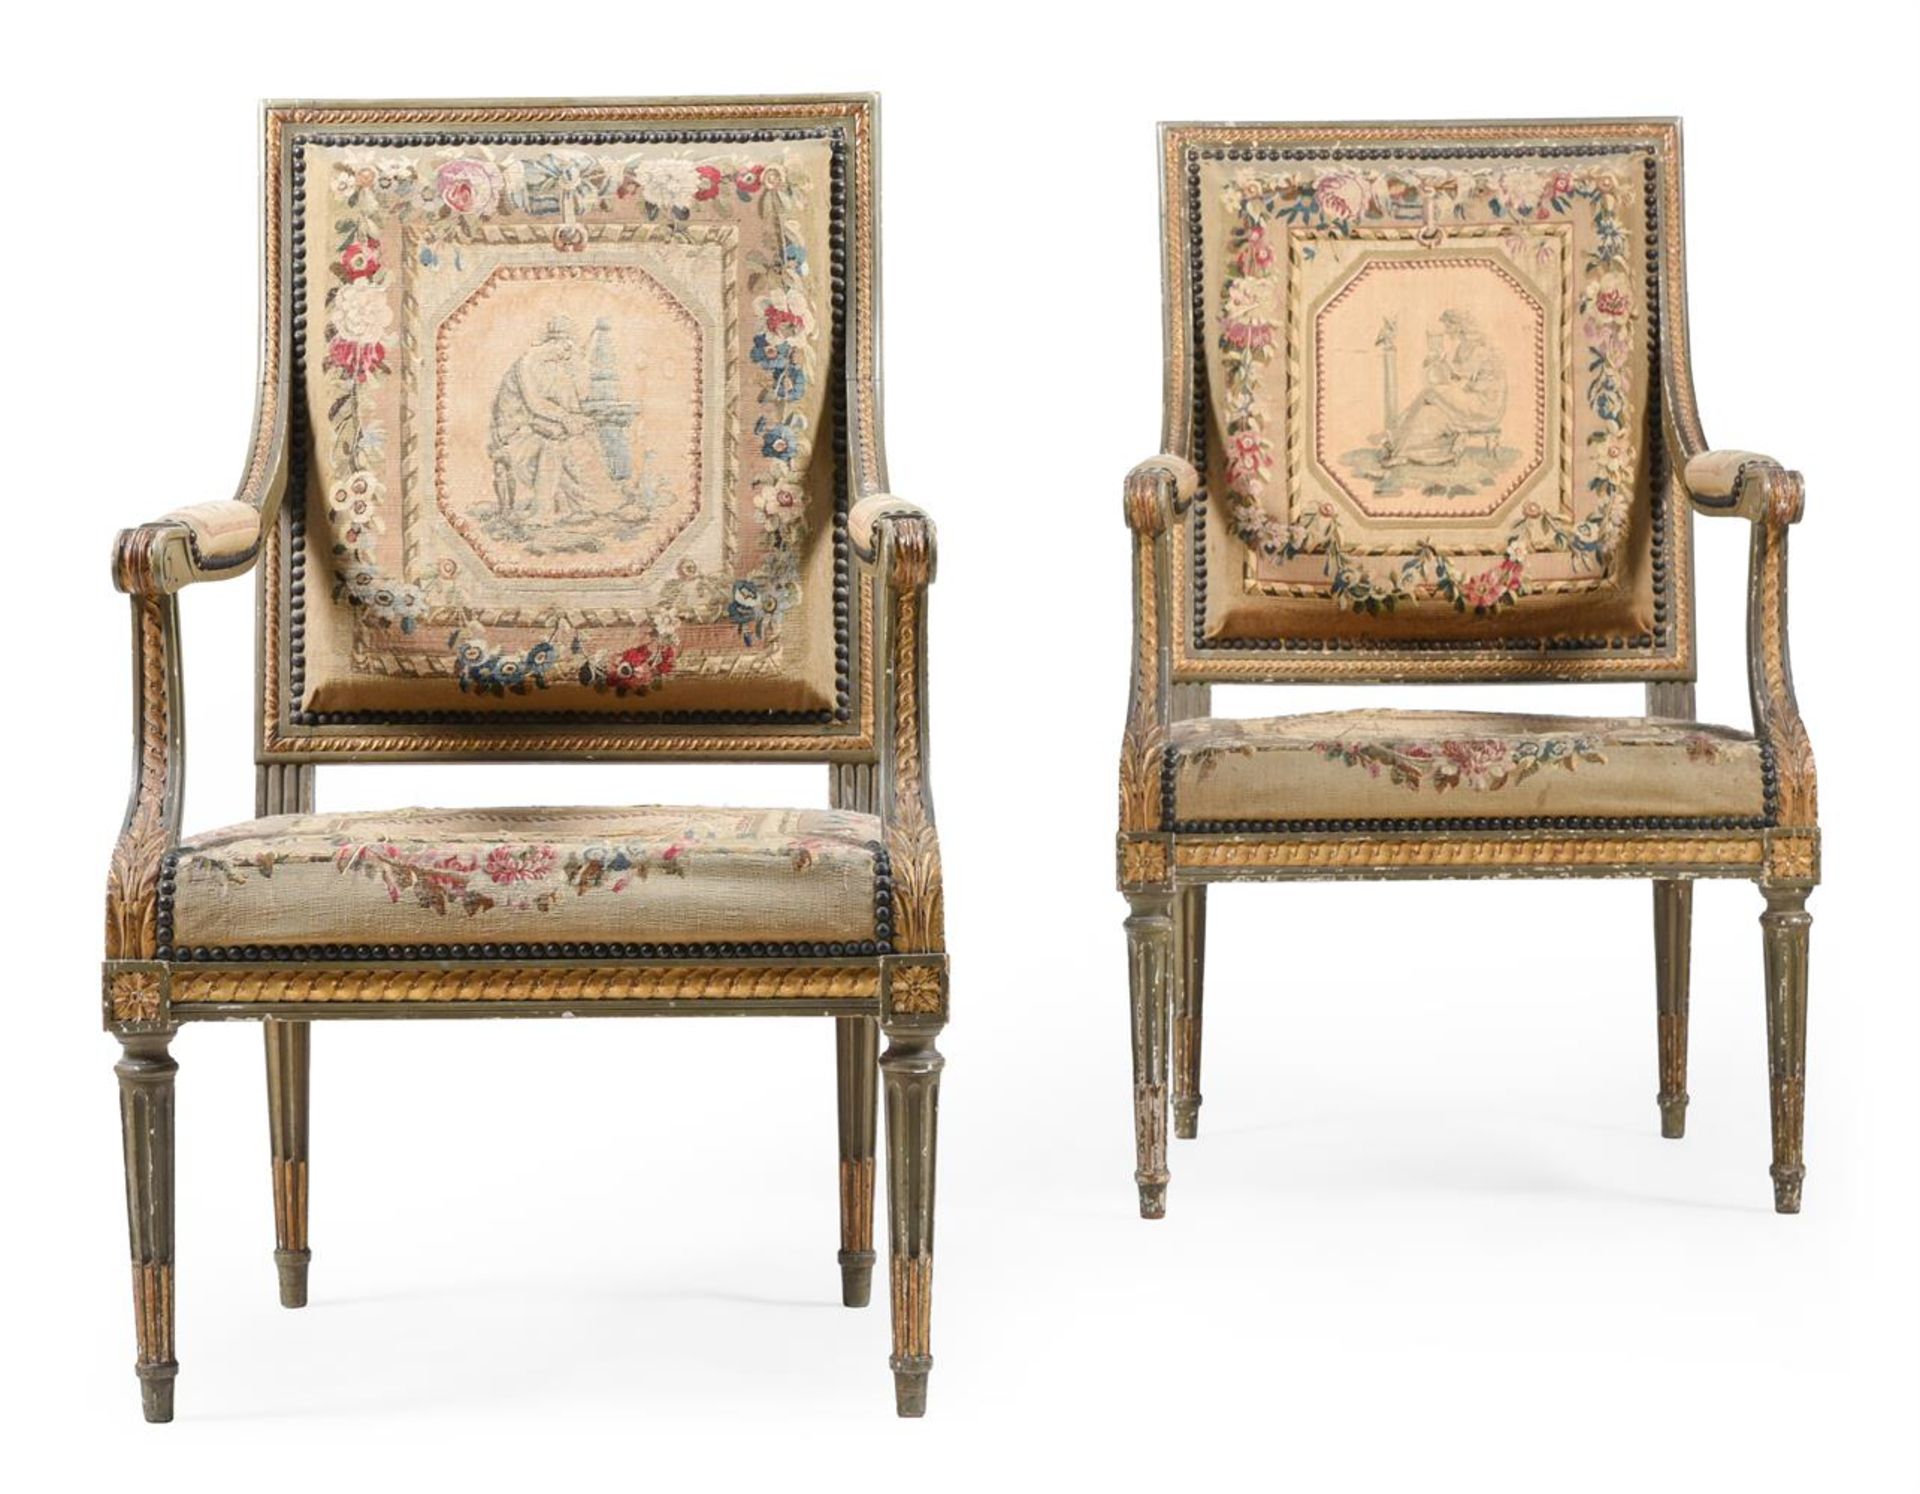 A CARVED GREEN PAINTED AND PARCEL GILT SUITE OF SEAT FURNITURE, LATE 19TH CENTURY - Image 3 of 10